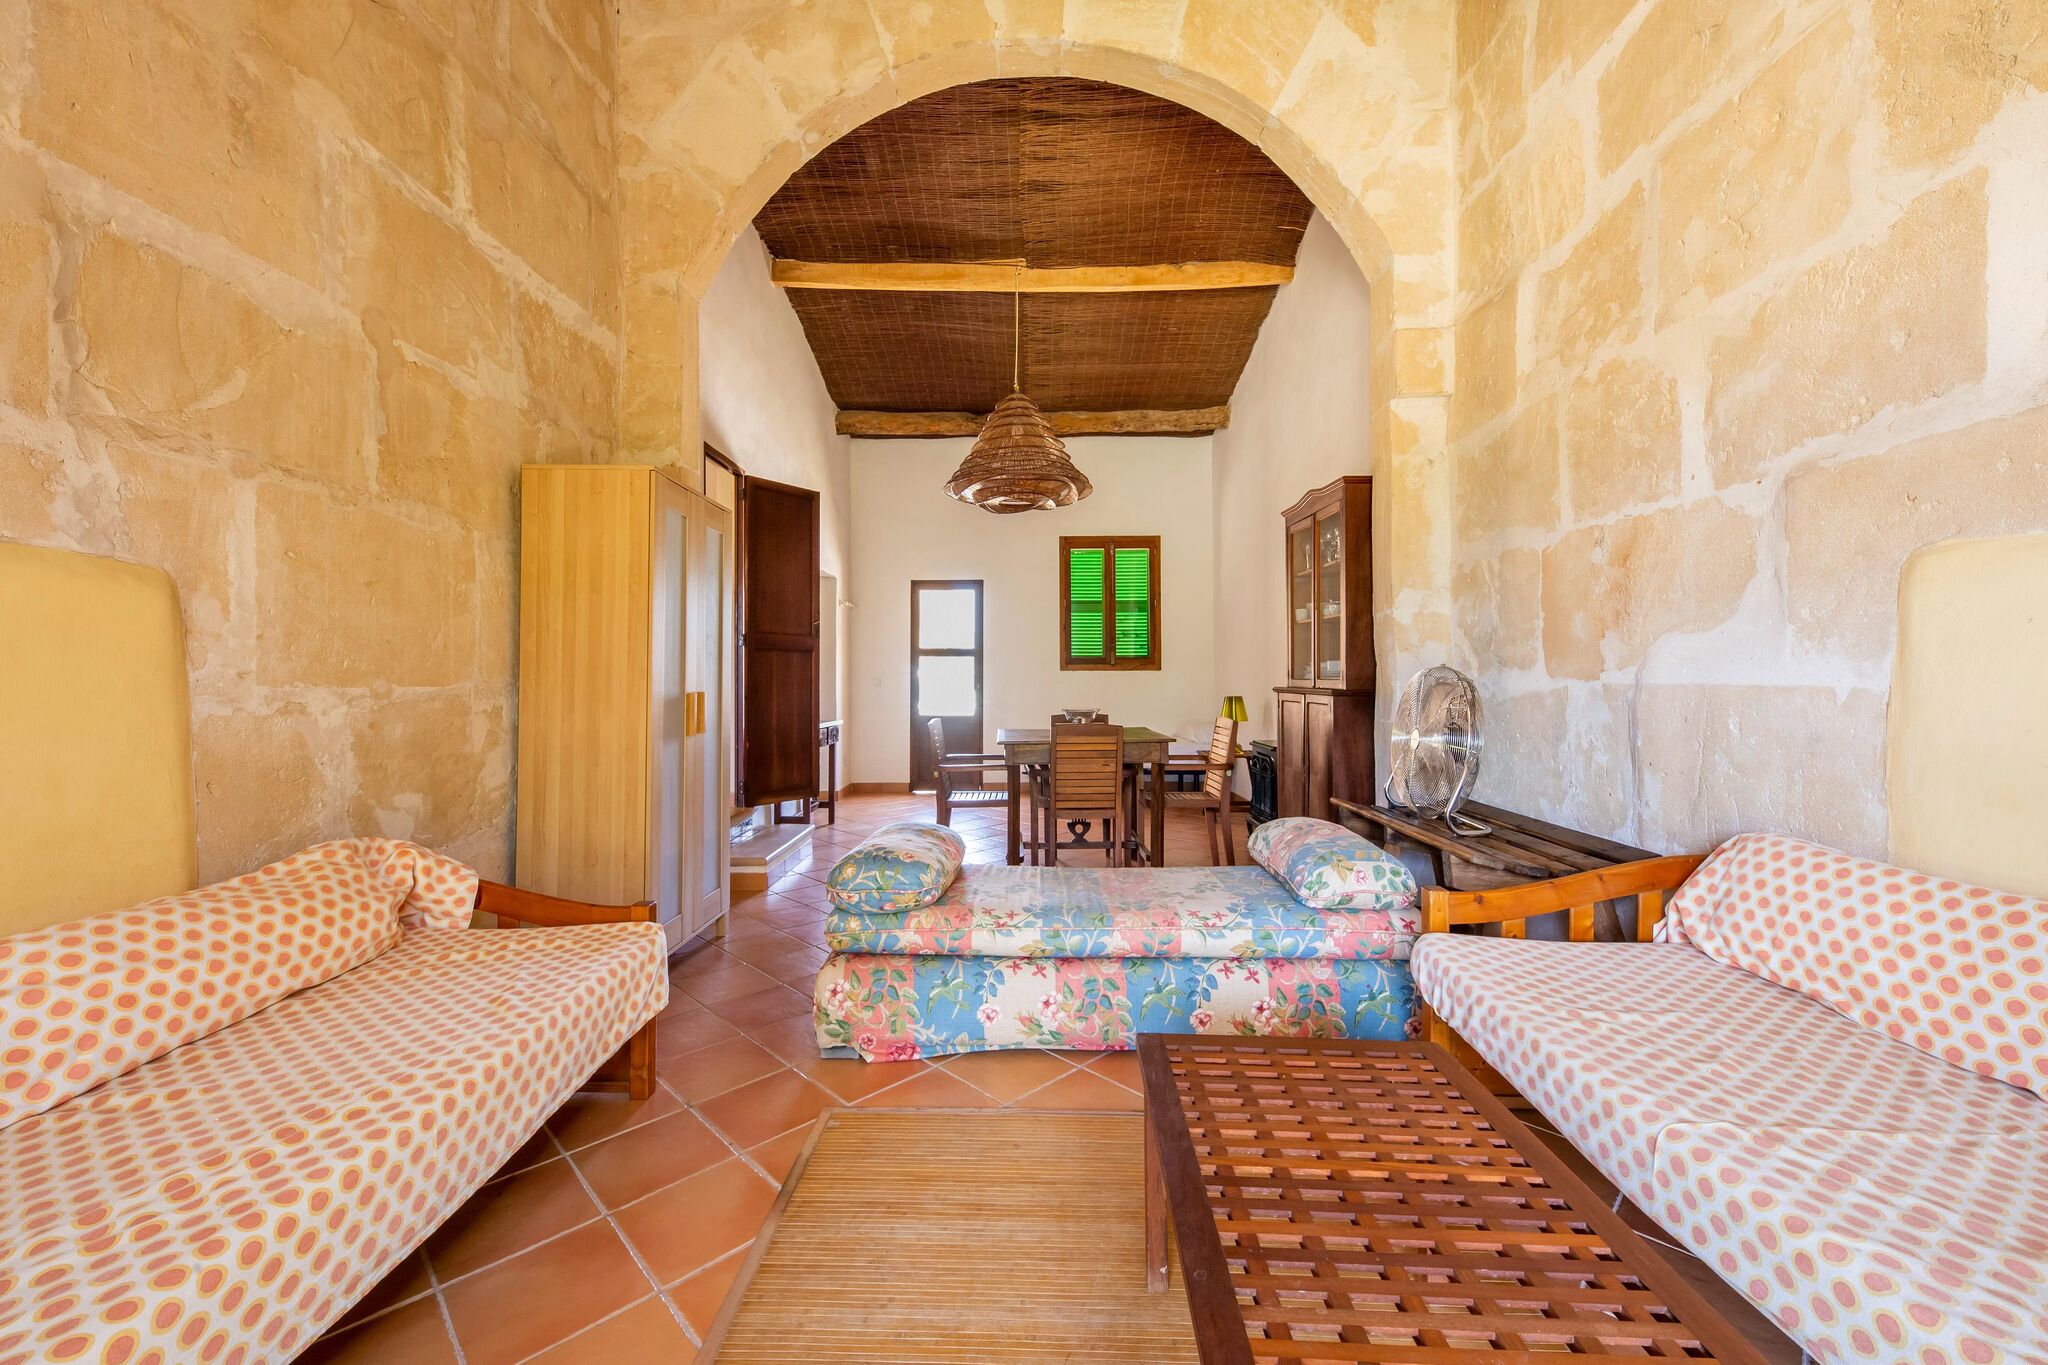 This finca has its own private access to the beautiful sandy beach Es Trenc